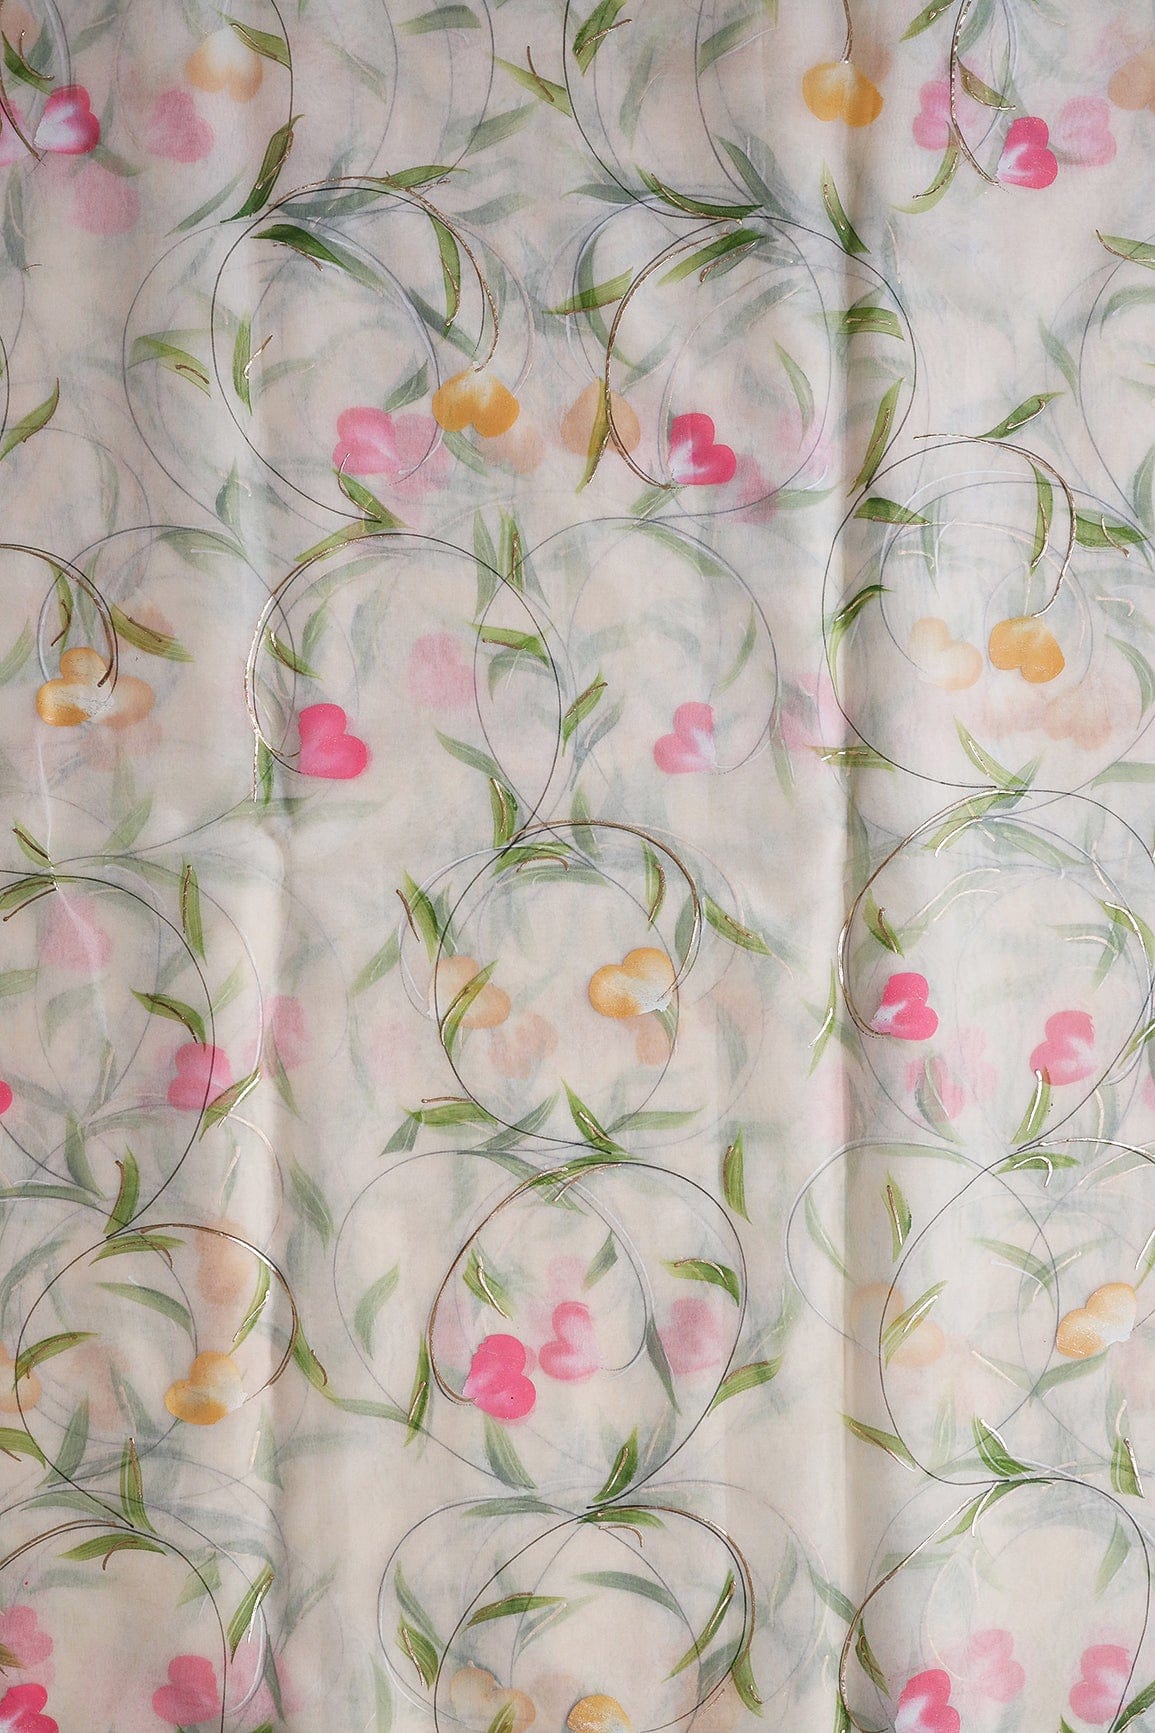 doeraa Embroidery Fabrics Beautiful Floral Hand Painted With Foil Work On Cream Organza Fabric